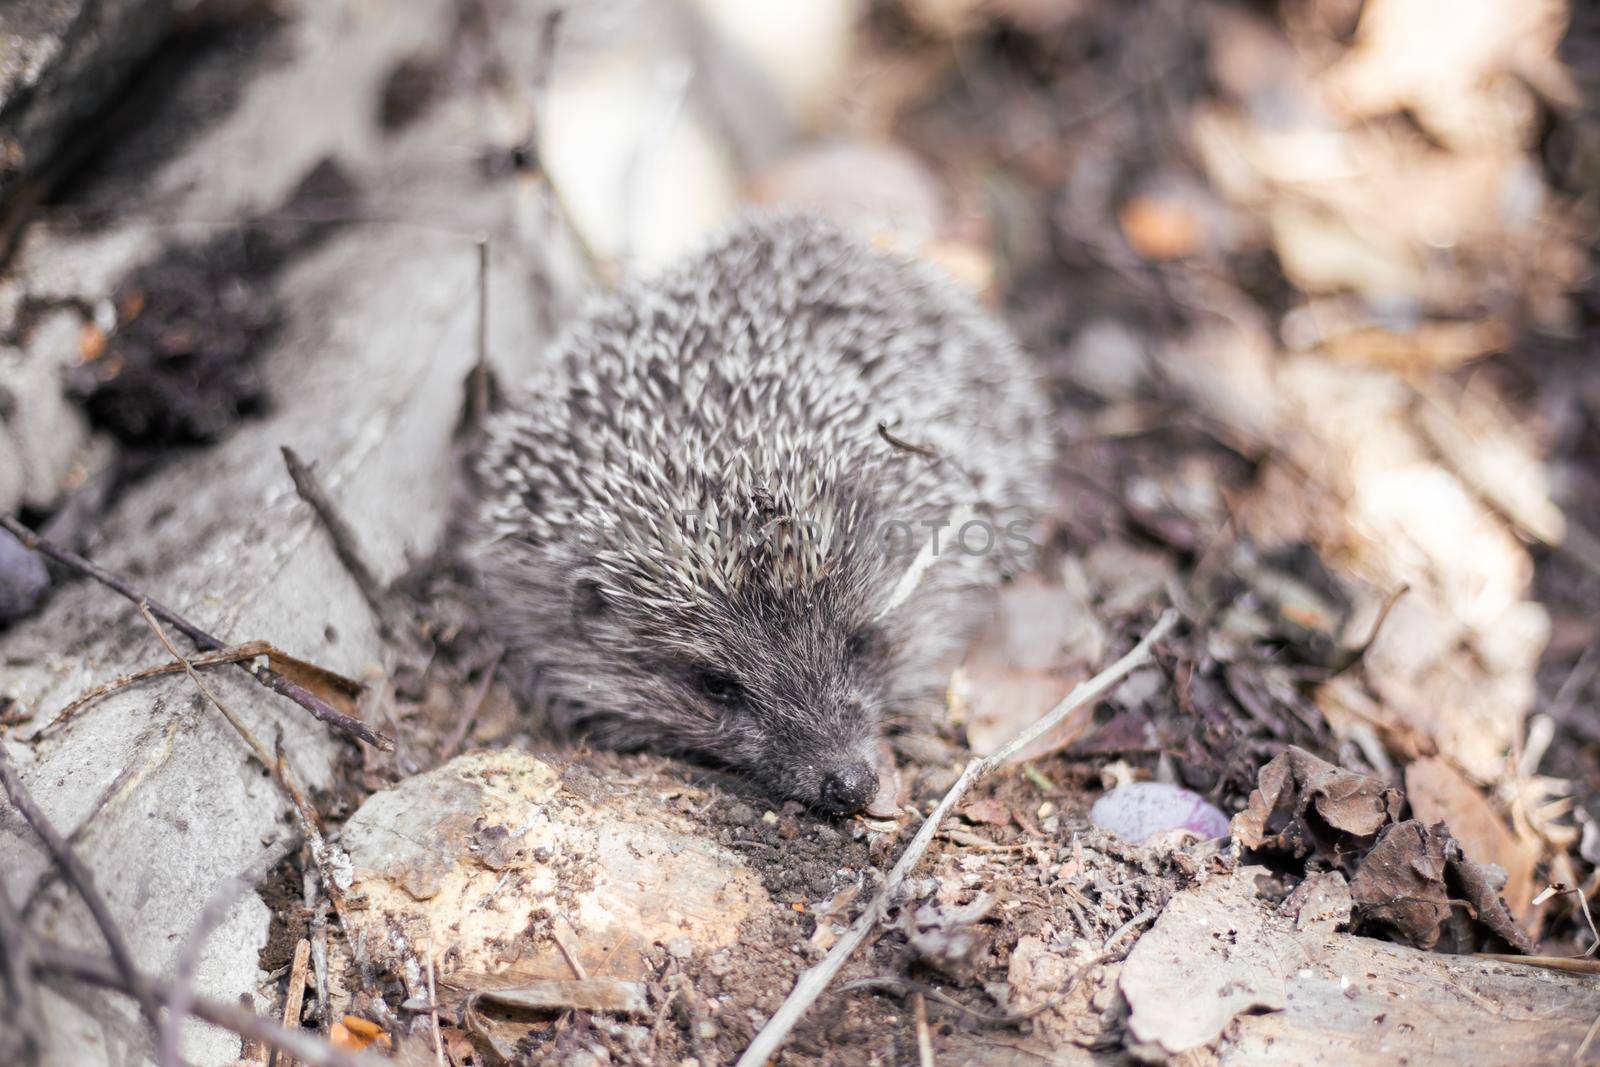 Small hedgehog in the foliage in the forest.